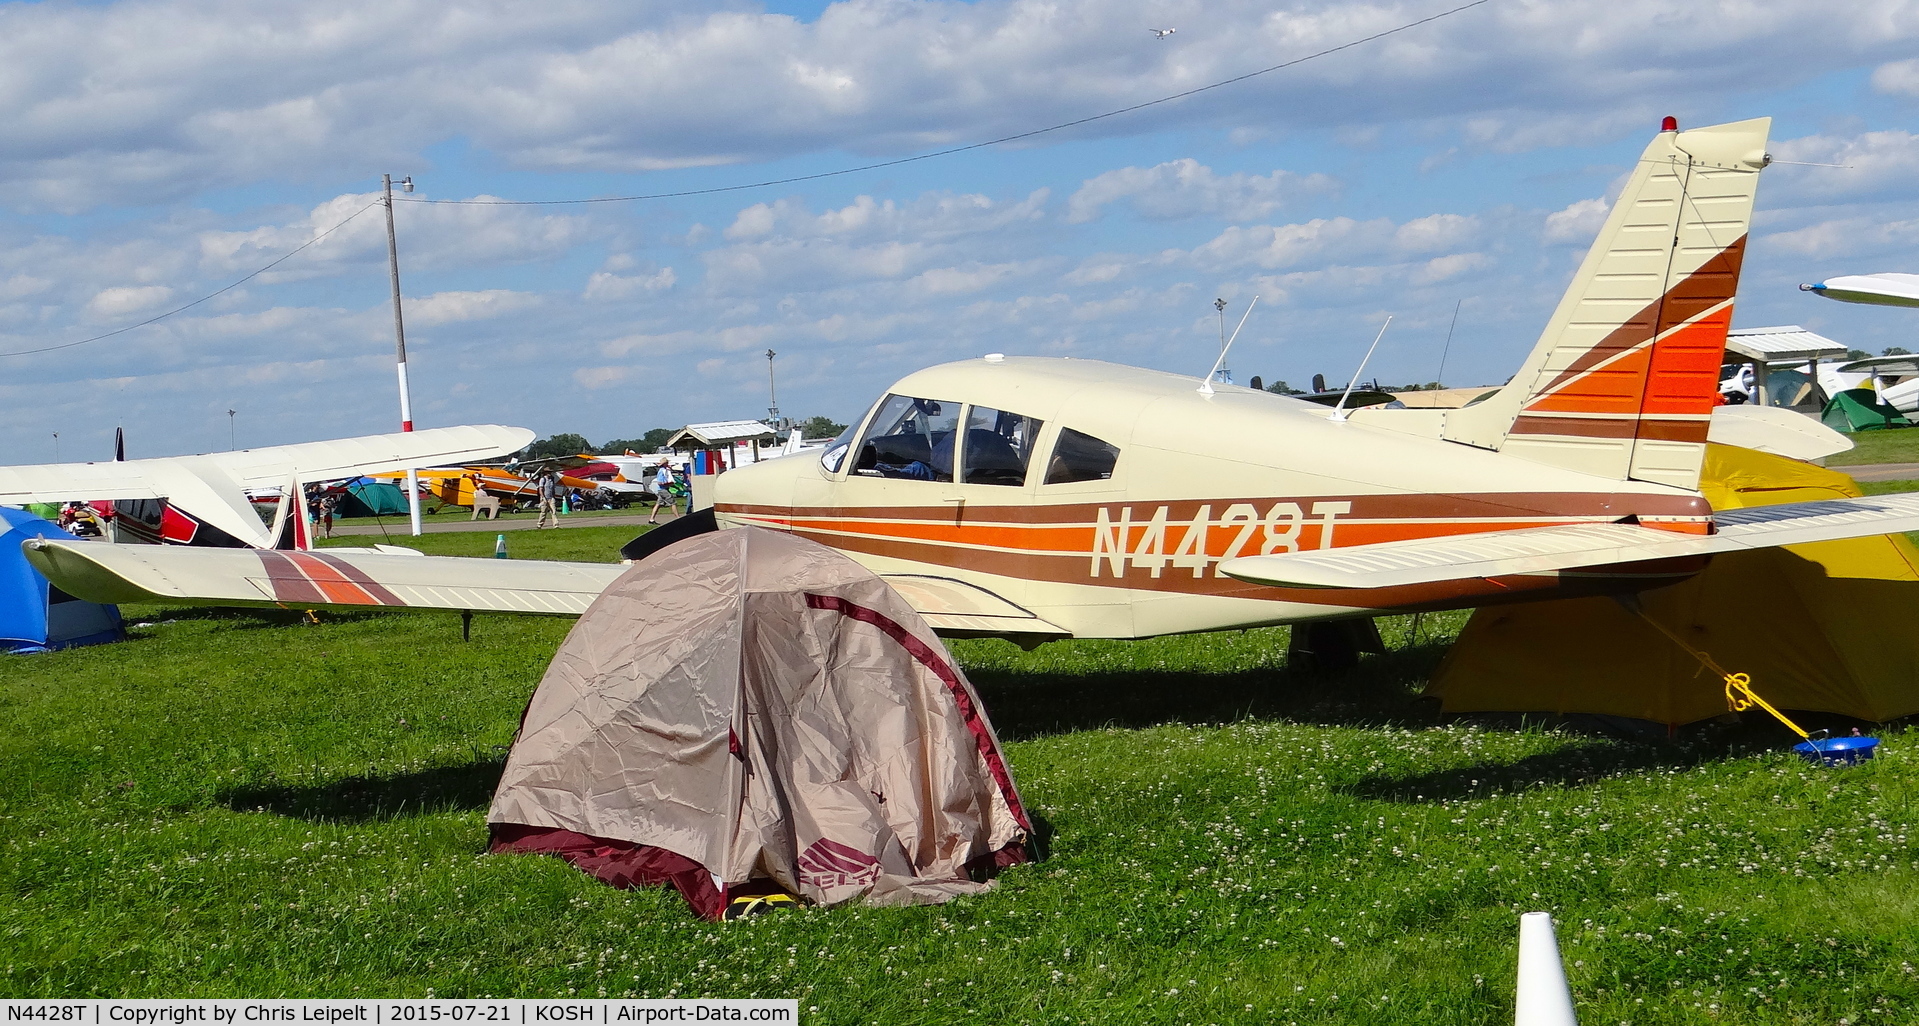 N4428T, 1972 Piper PA-28R-200 Cherokee Arrow C/N 28R-7235047, Vermont-based 1972 Piper PA-28R-200 at EAA AirVenture 2015.